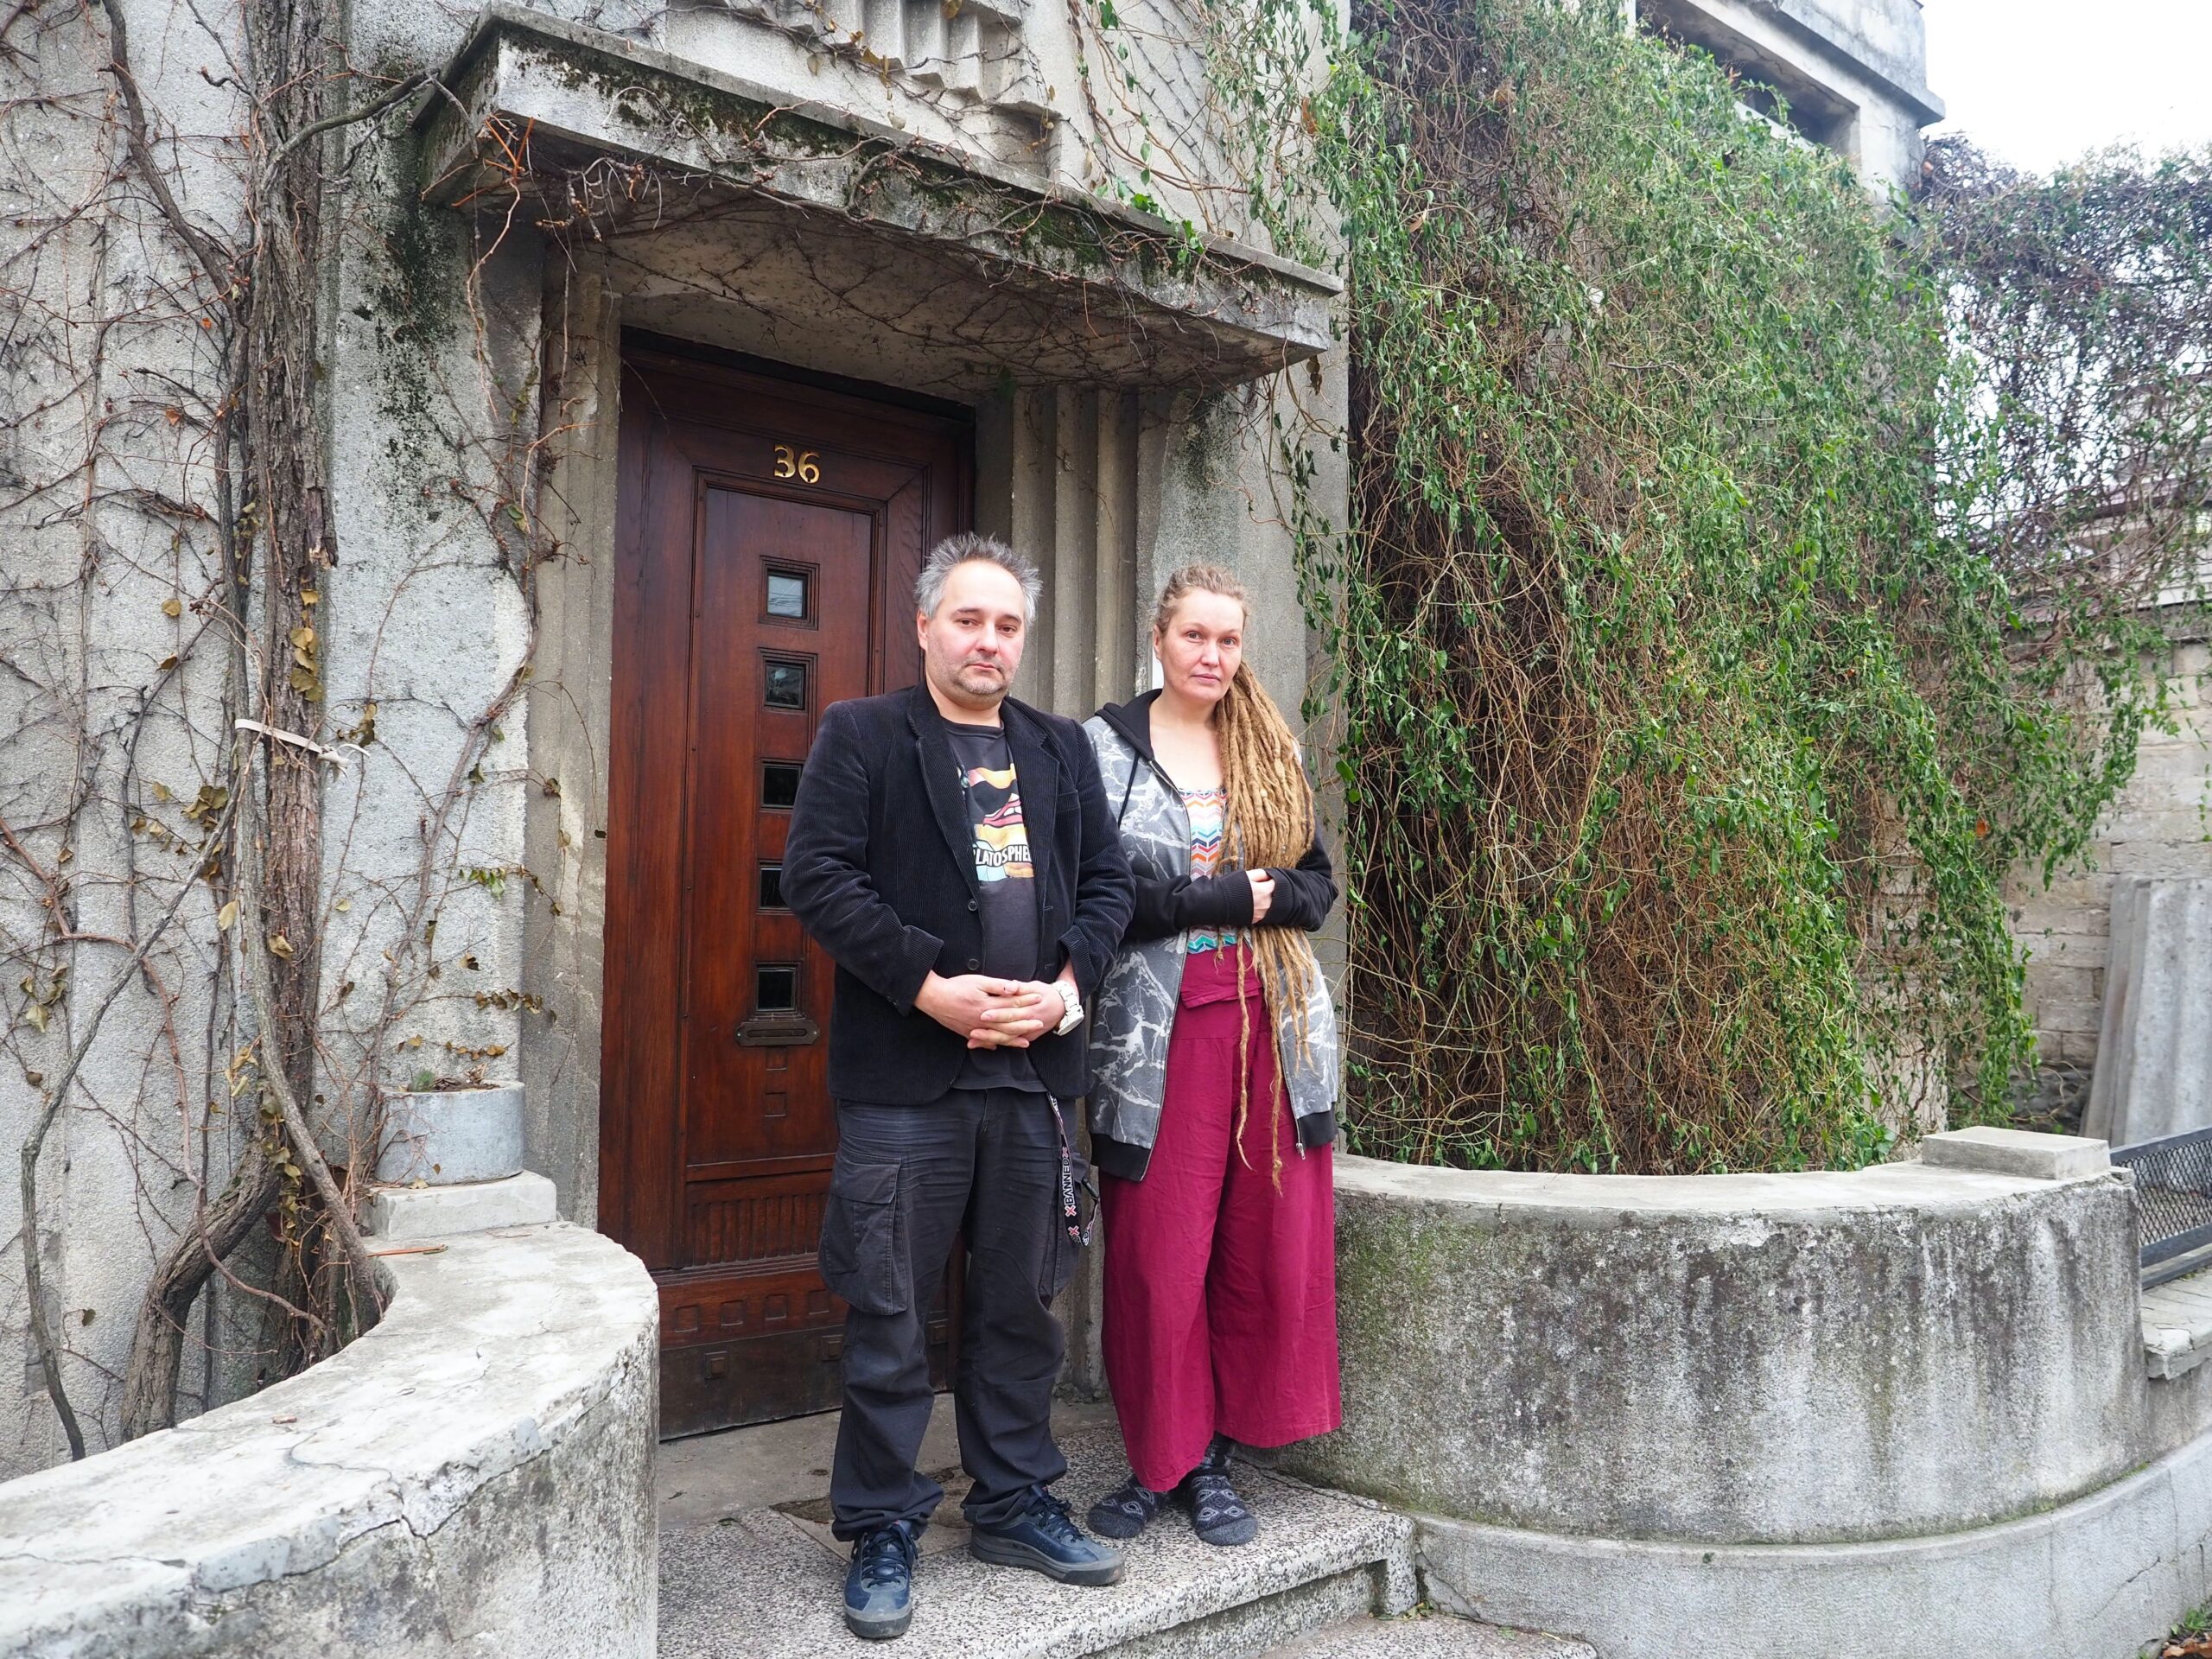 Nikita Kalashnikoff is in front of his childhood home with his wife, Solly, now the artistic director of the newborn art community in Chisinau.